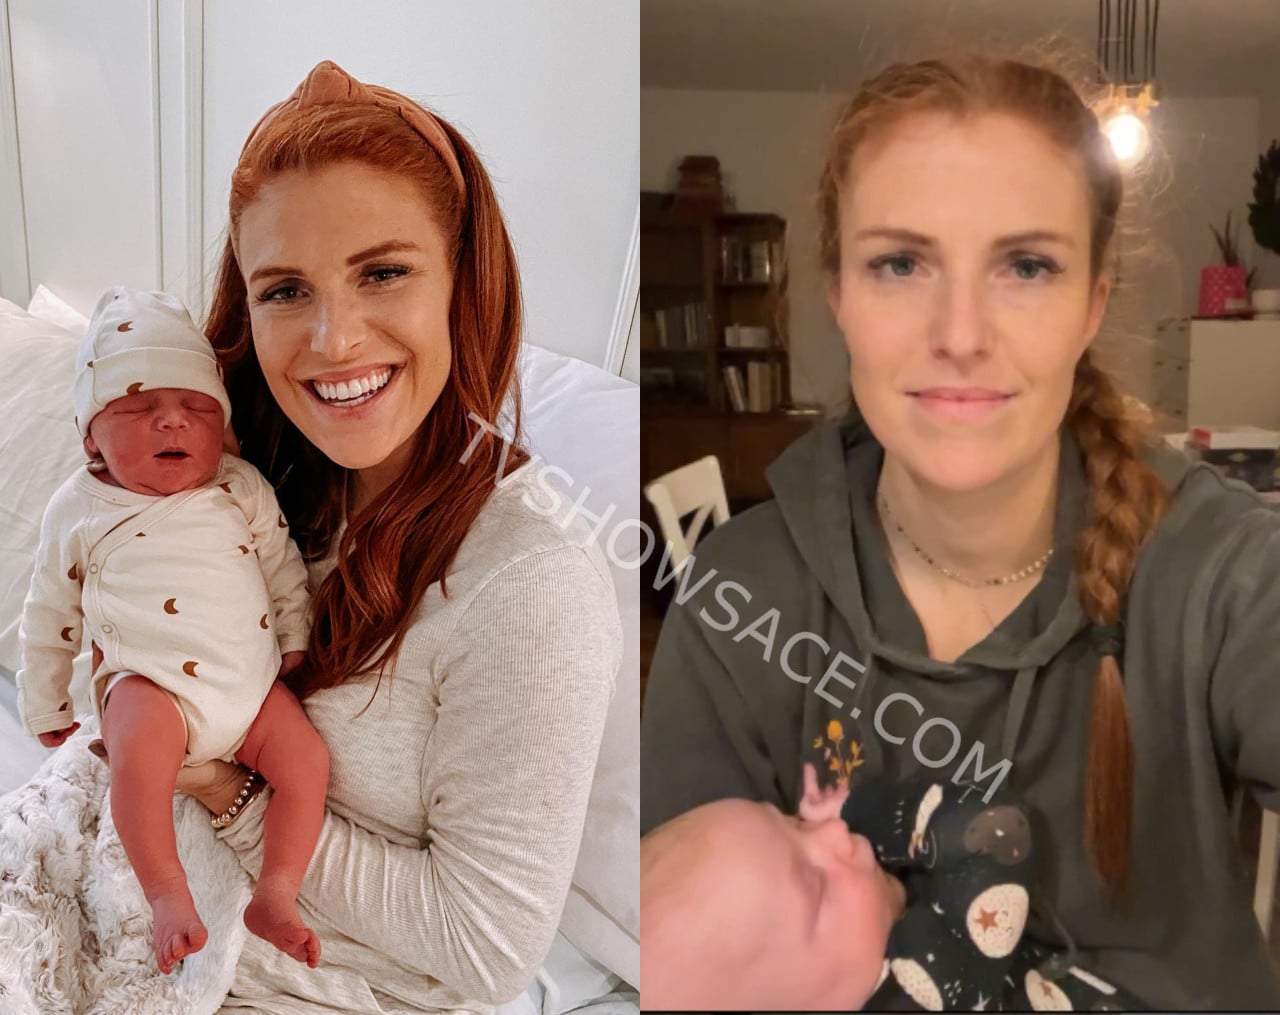 A photo of one woman with different shades of red hair